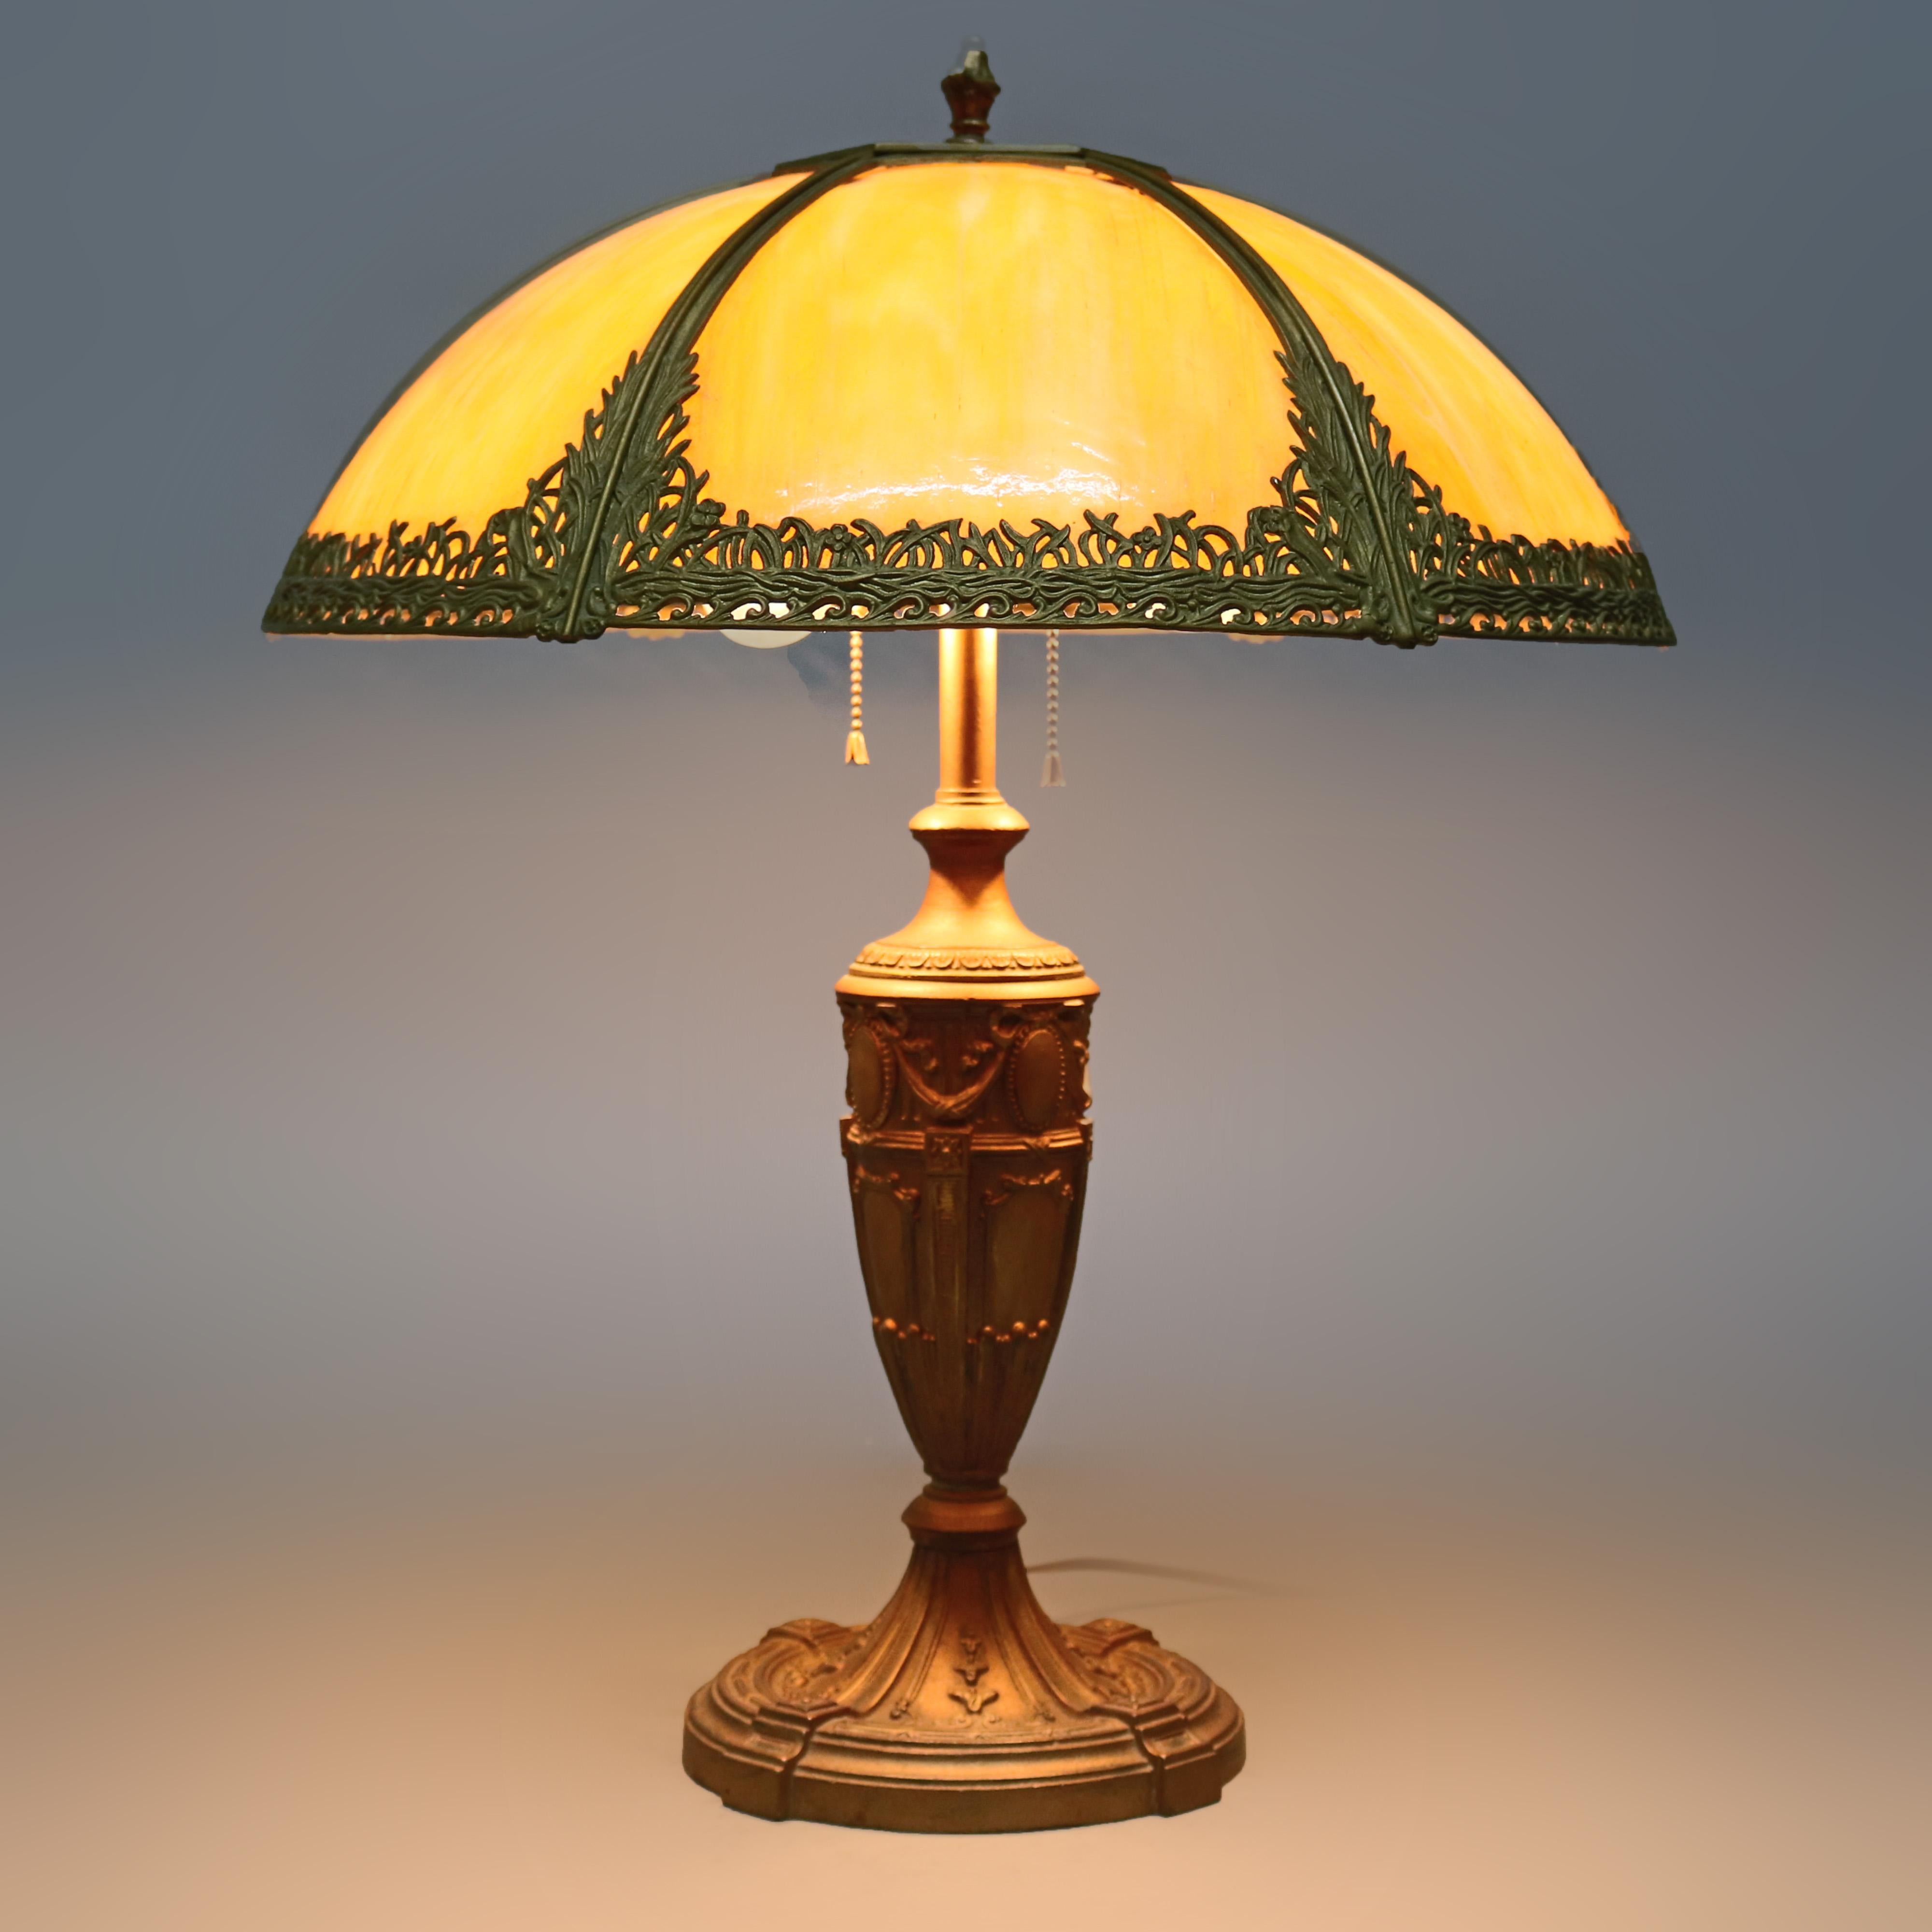 An antique Arts & Crafts table lamp in the manner of Bradley & Hubbard offers cast and gilt foliate filigree frame housing curved slag glass panels surmounting urn form double socket base with embossed Classical elements, circa 1920.

Measures: